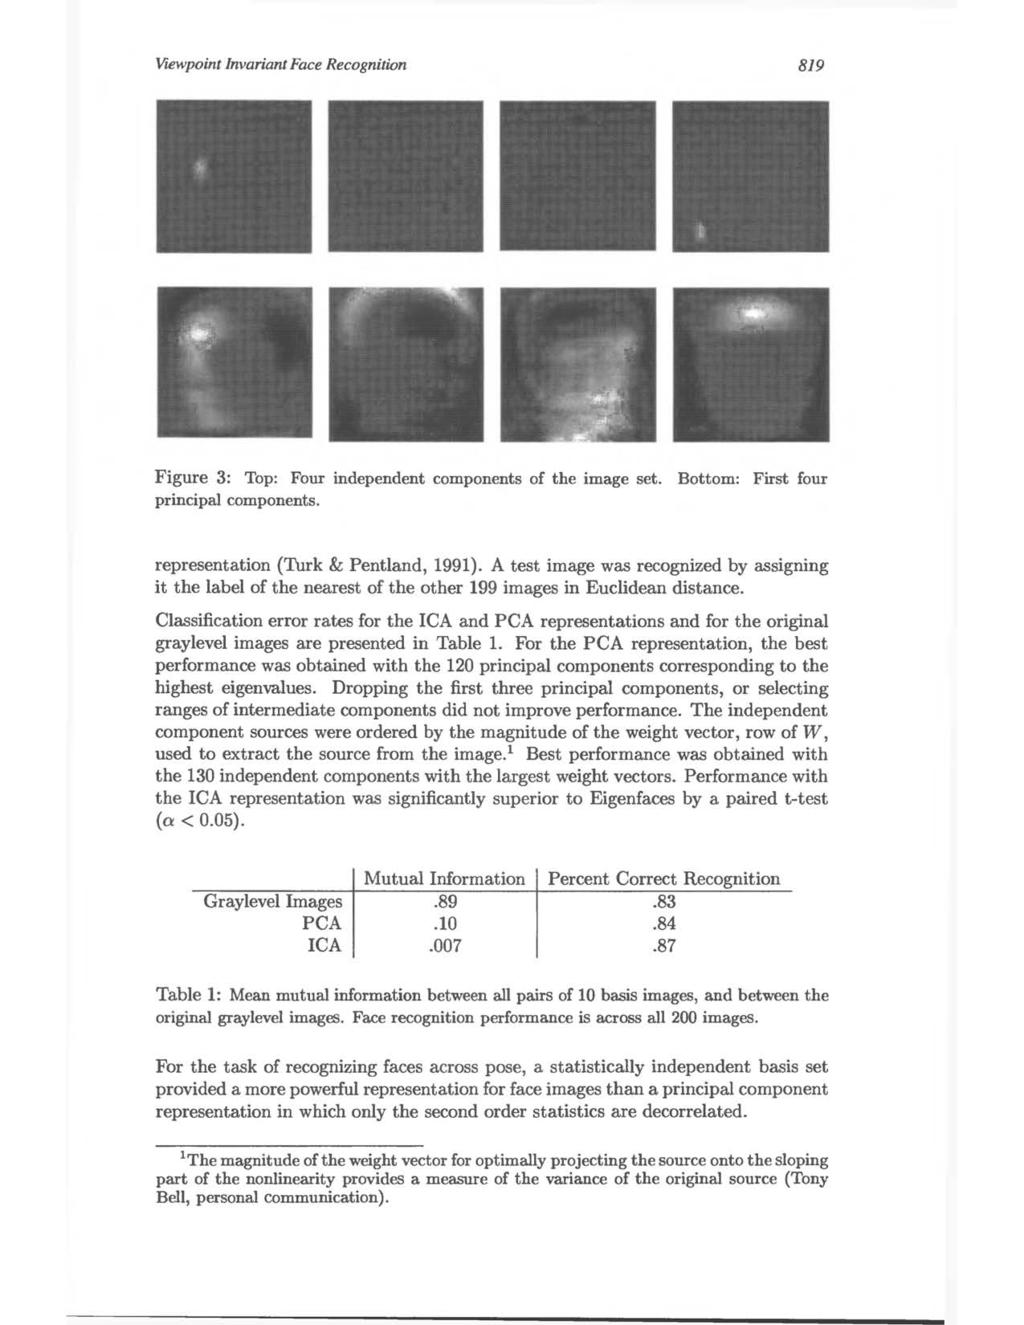 Viewpoint Invariant Face Recognition 819 Figure 3: Top: Four independent components of the image set. Bottom: First four principal components. representation (Turk & Pentland, 1991).